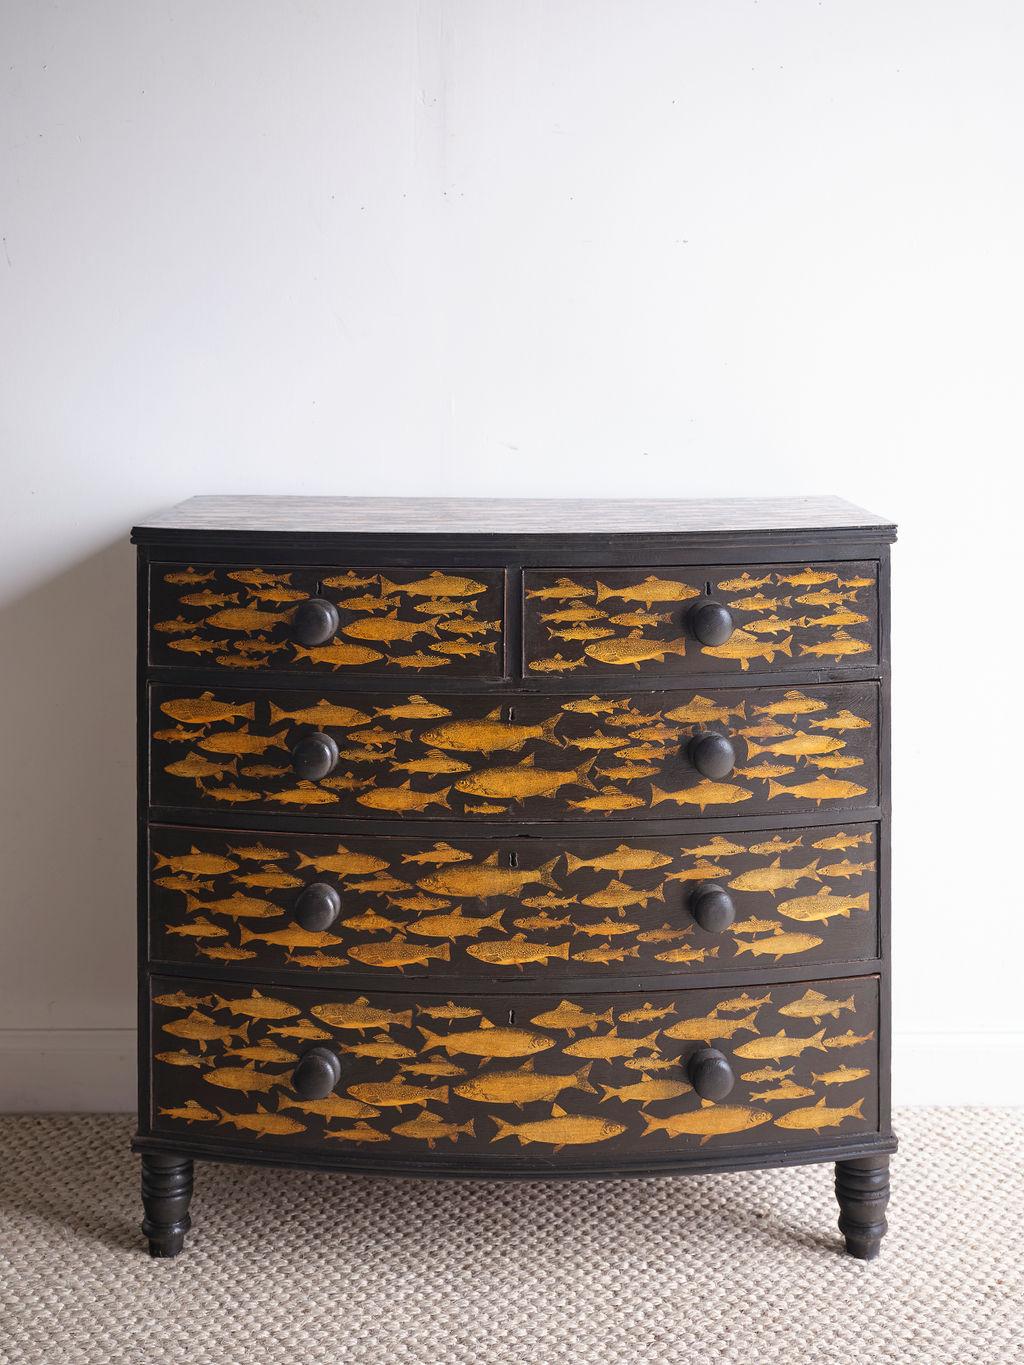 This lovely and unique English Victorian chest of drawers with a fish design would really make a huge statement in any room! The fish have a light caramel color and the background is black. There are two top smaller drawers and three larger bottom